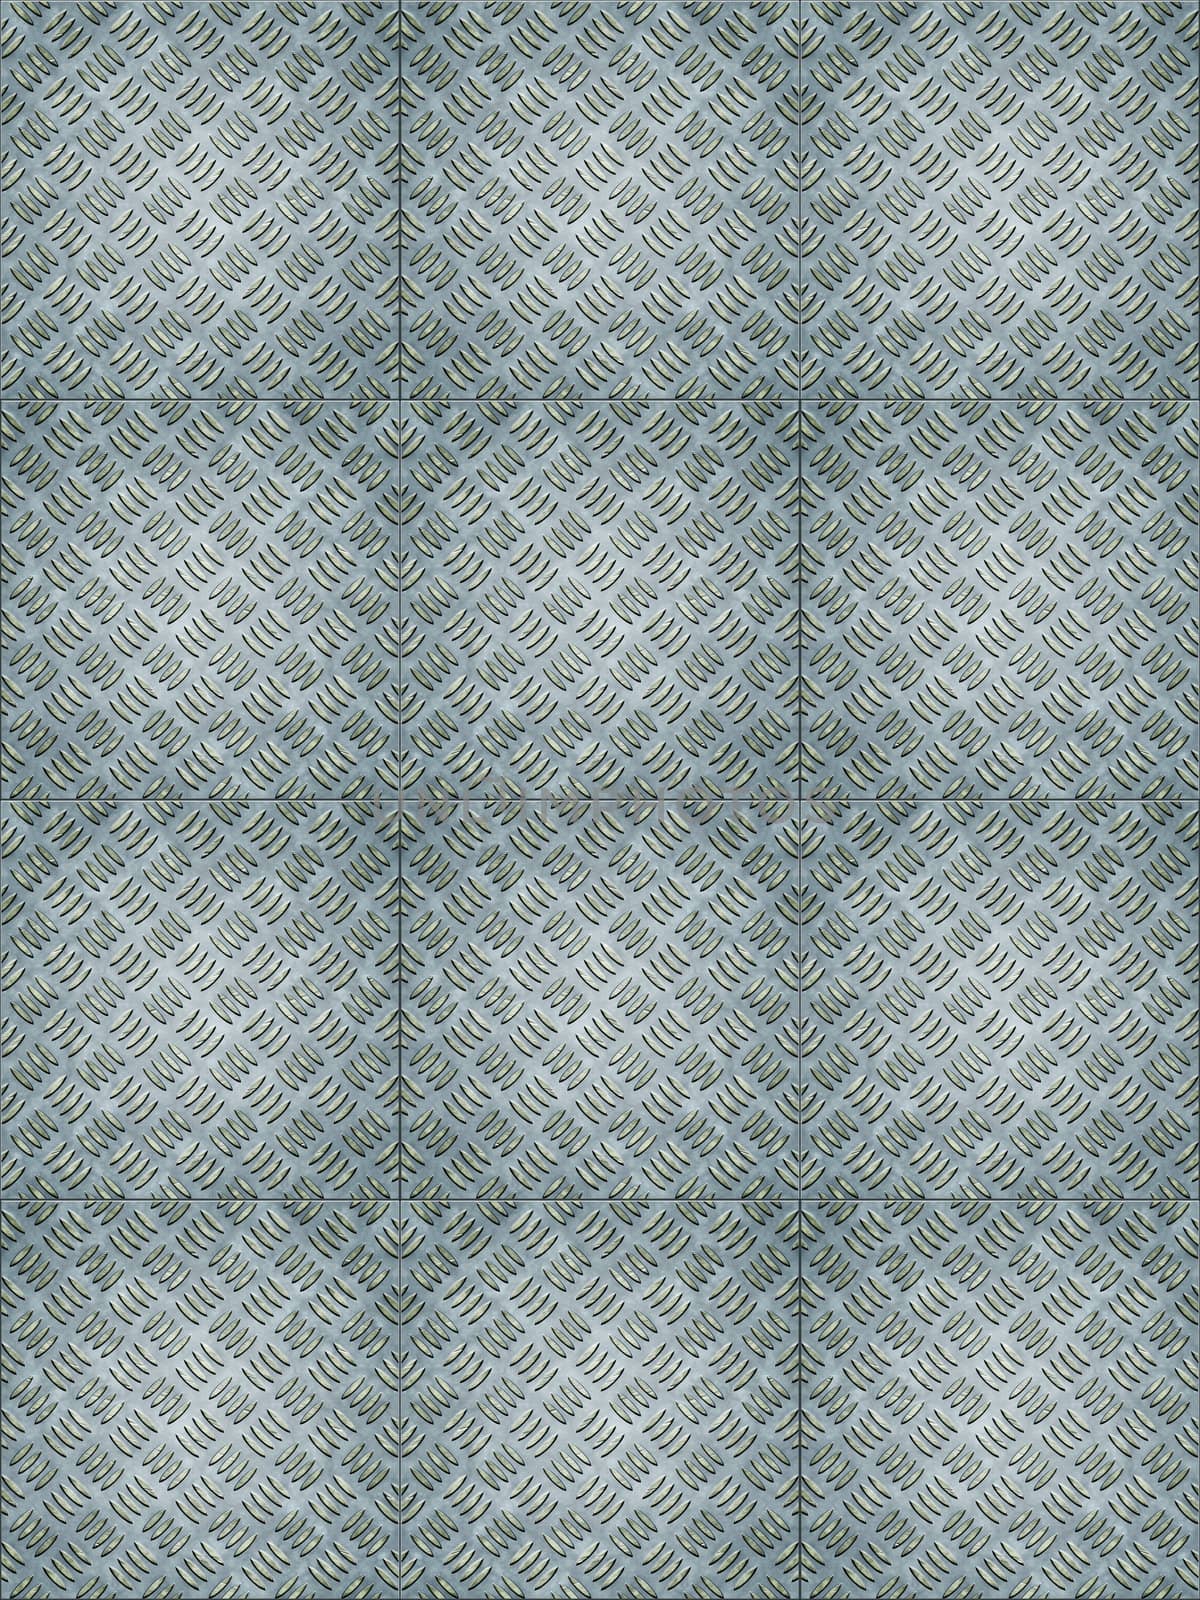 An image of a brushed metal plate background